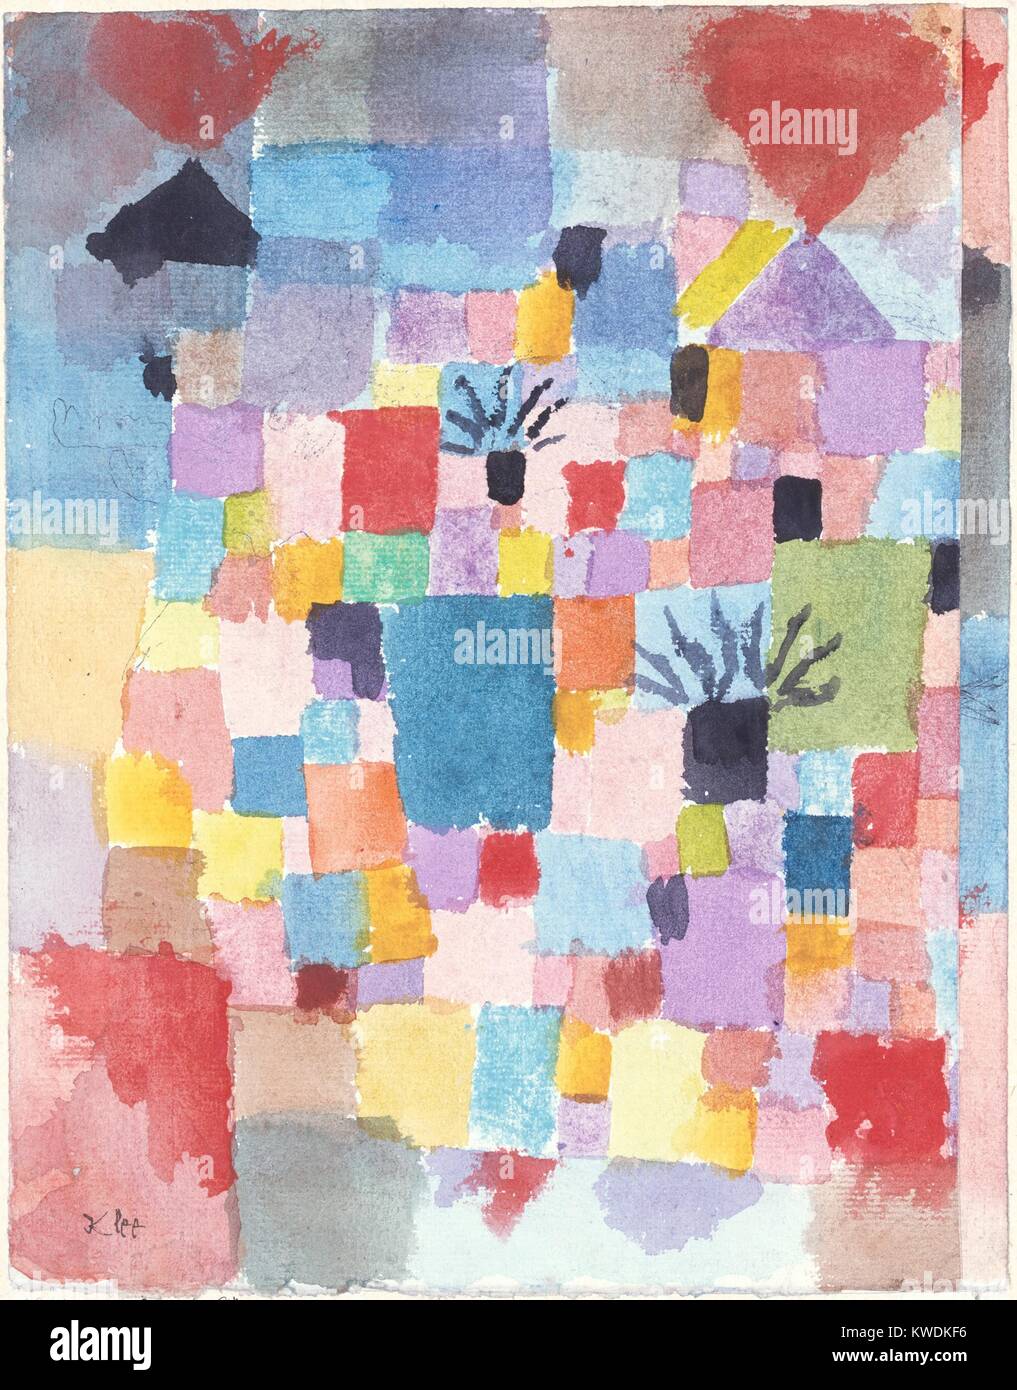 SOUTHERN GARDENS, by Paul Klee, 1913, Swiss drawing, watercolor and ink on paper. This early abstract work was painted under the influence of Cubists Picasso and Braque, and the abstract colorists Robert Delaunay and August Macke. (BSLOC 2017 7 55) Stock Photo